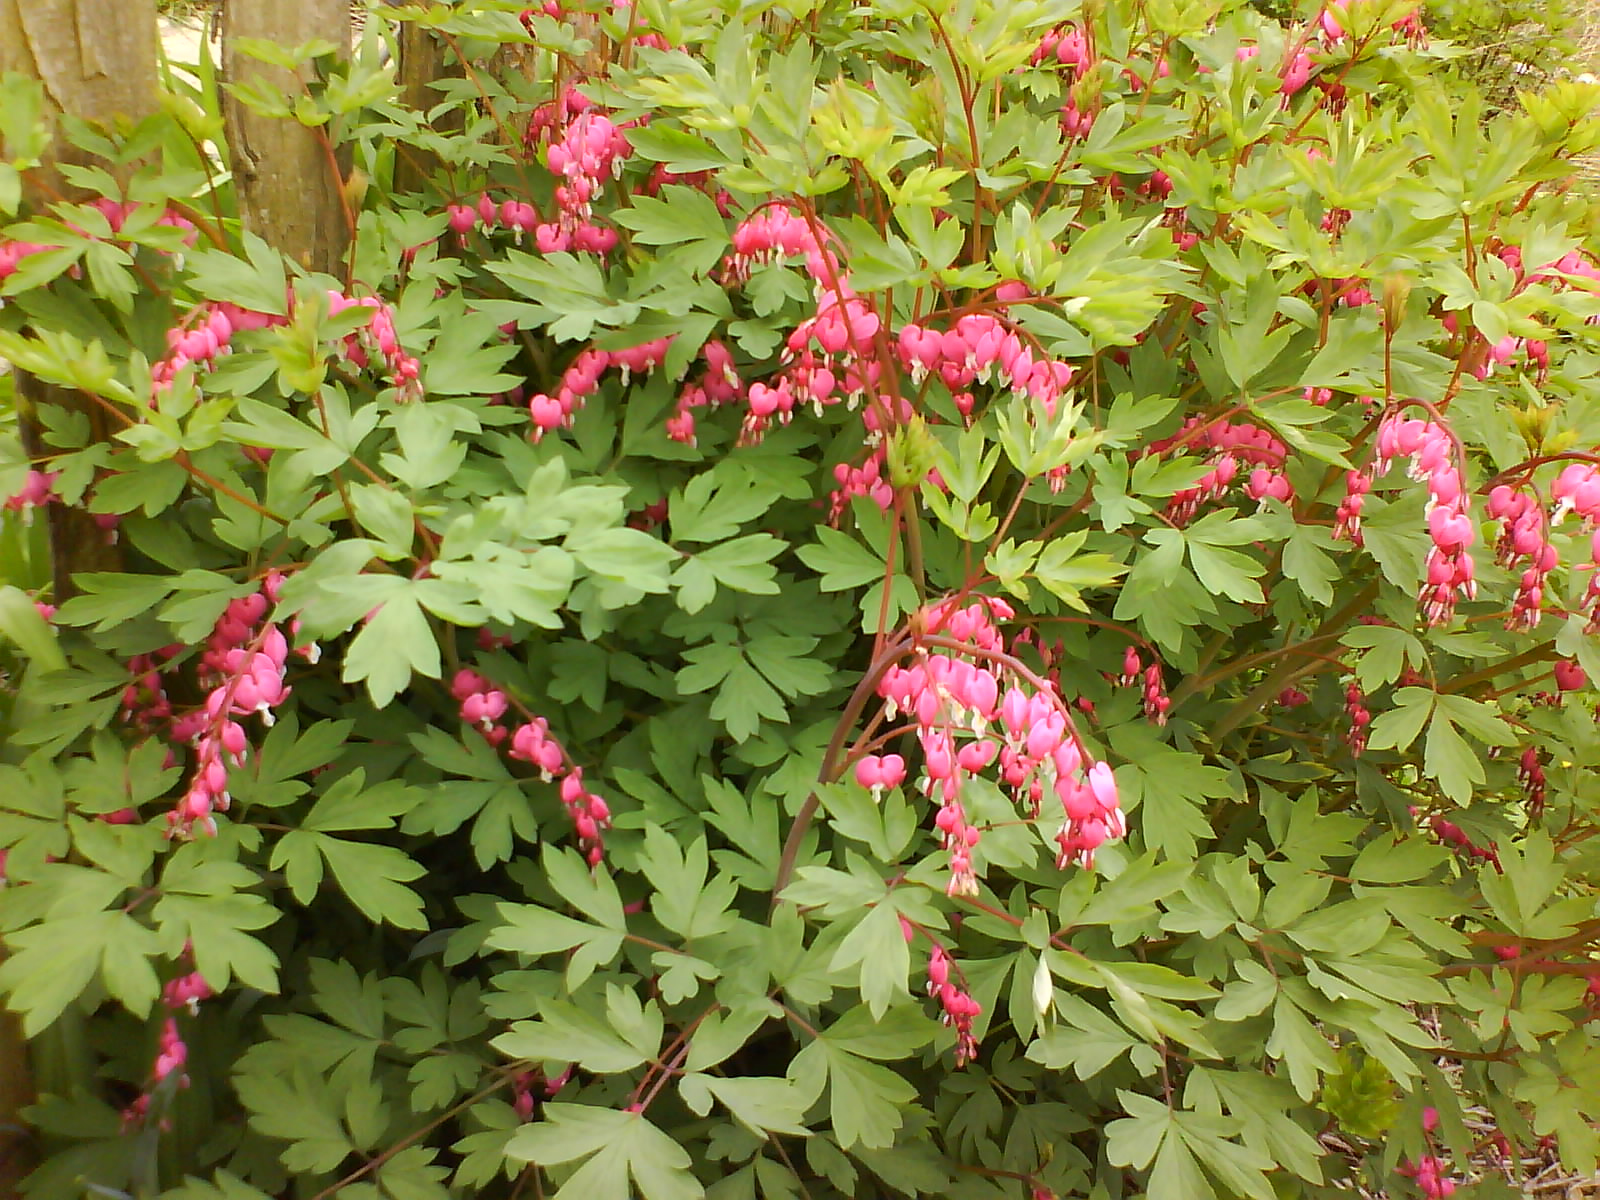 garden at heart: Dicentra or not Dicentra?